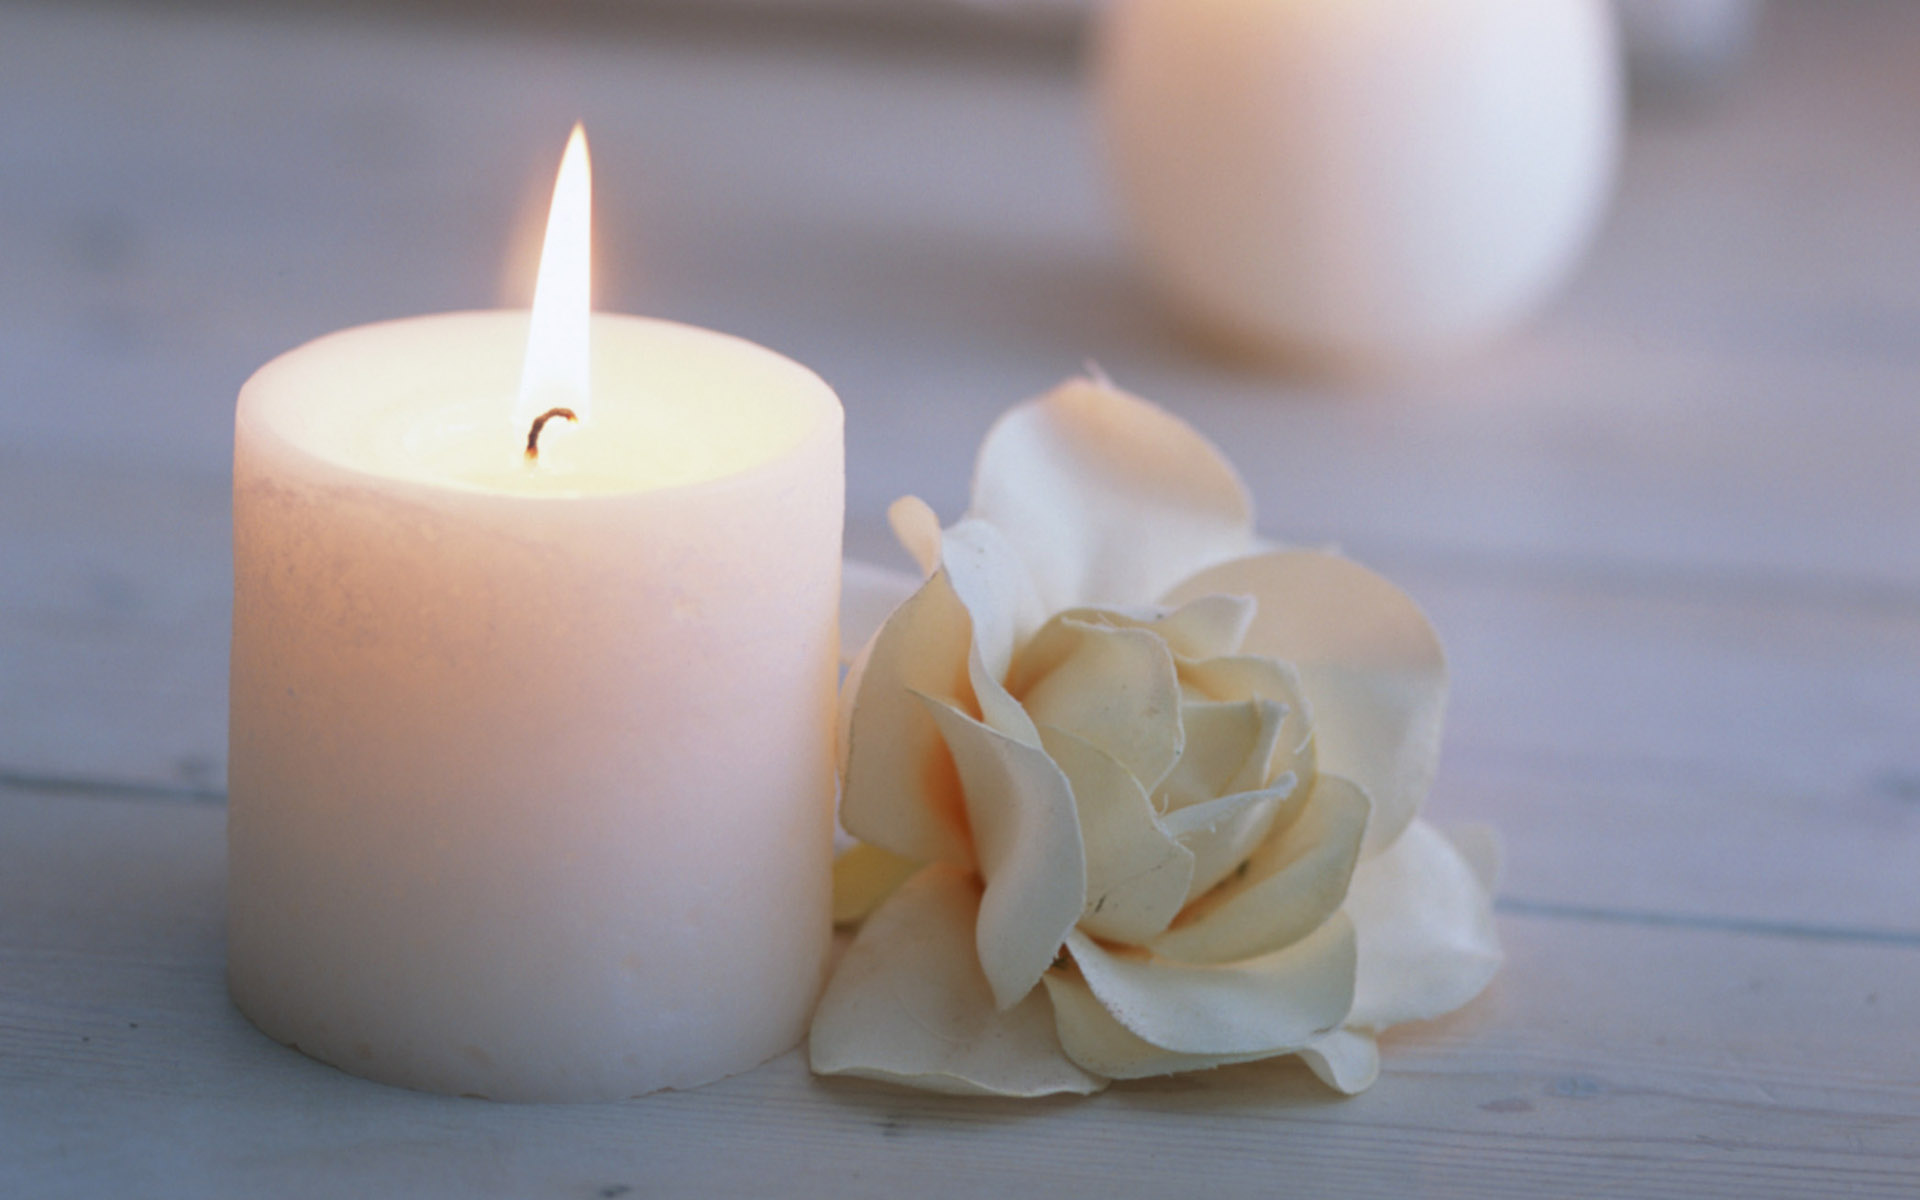 Candle Wallpaper - White Candle And Flower - 1920x1200 Wallpaper